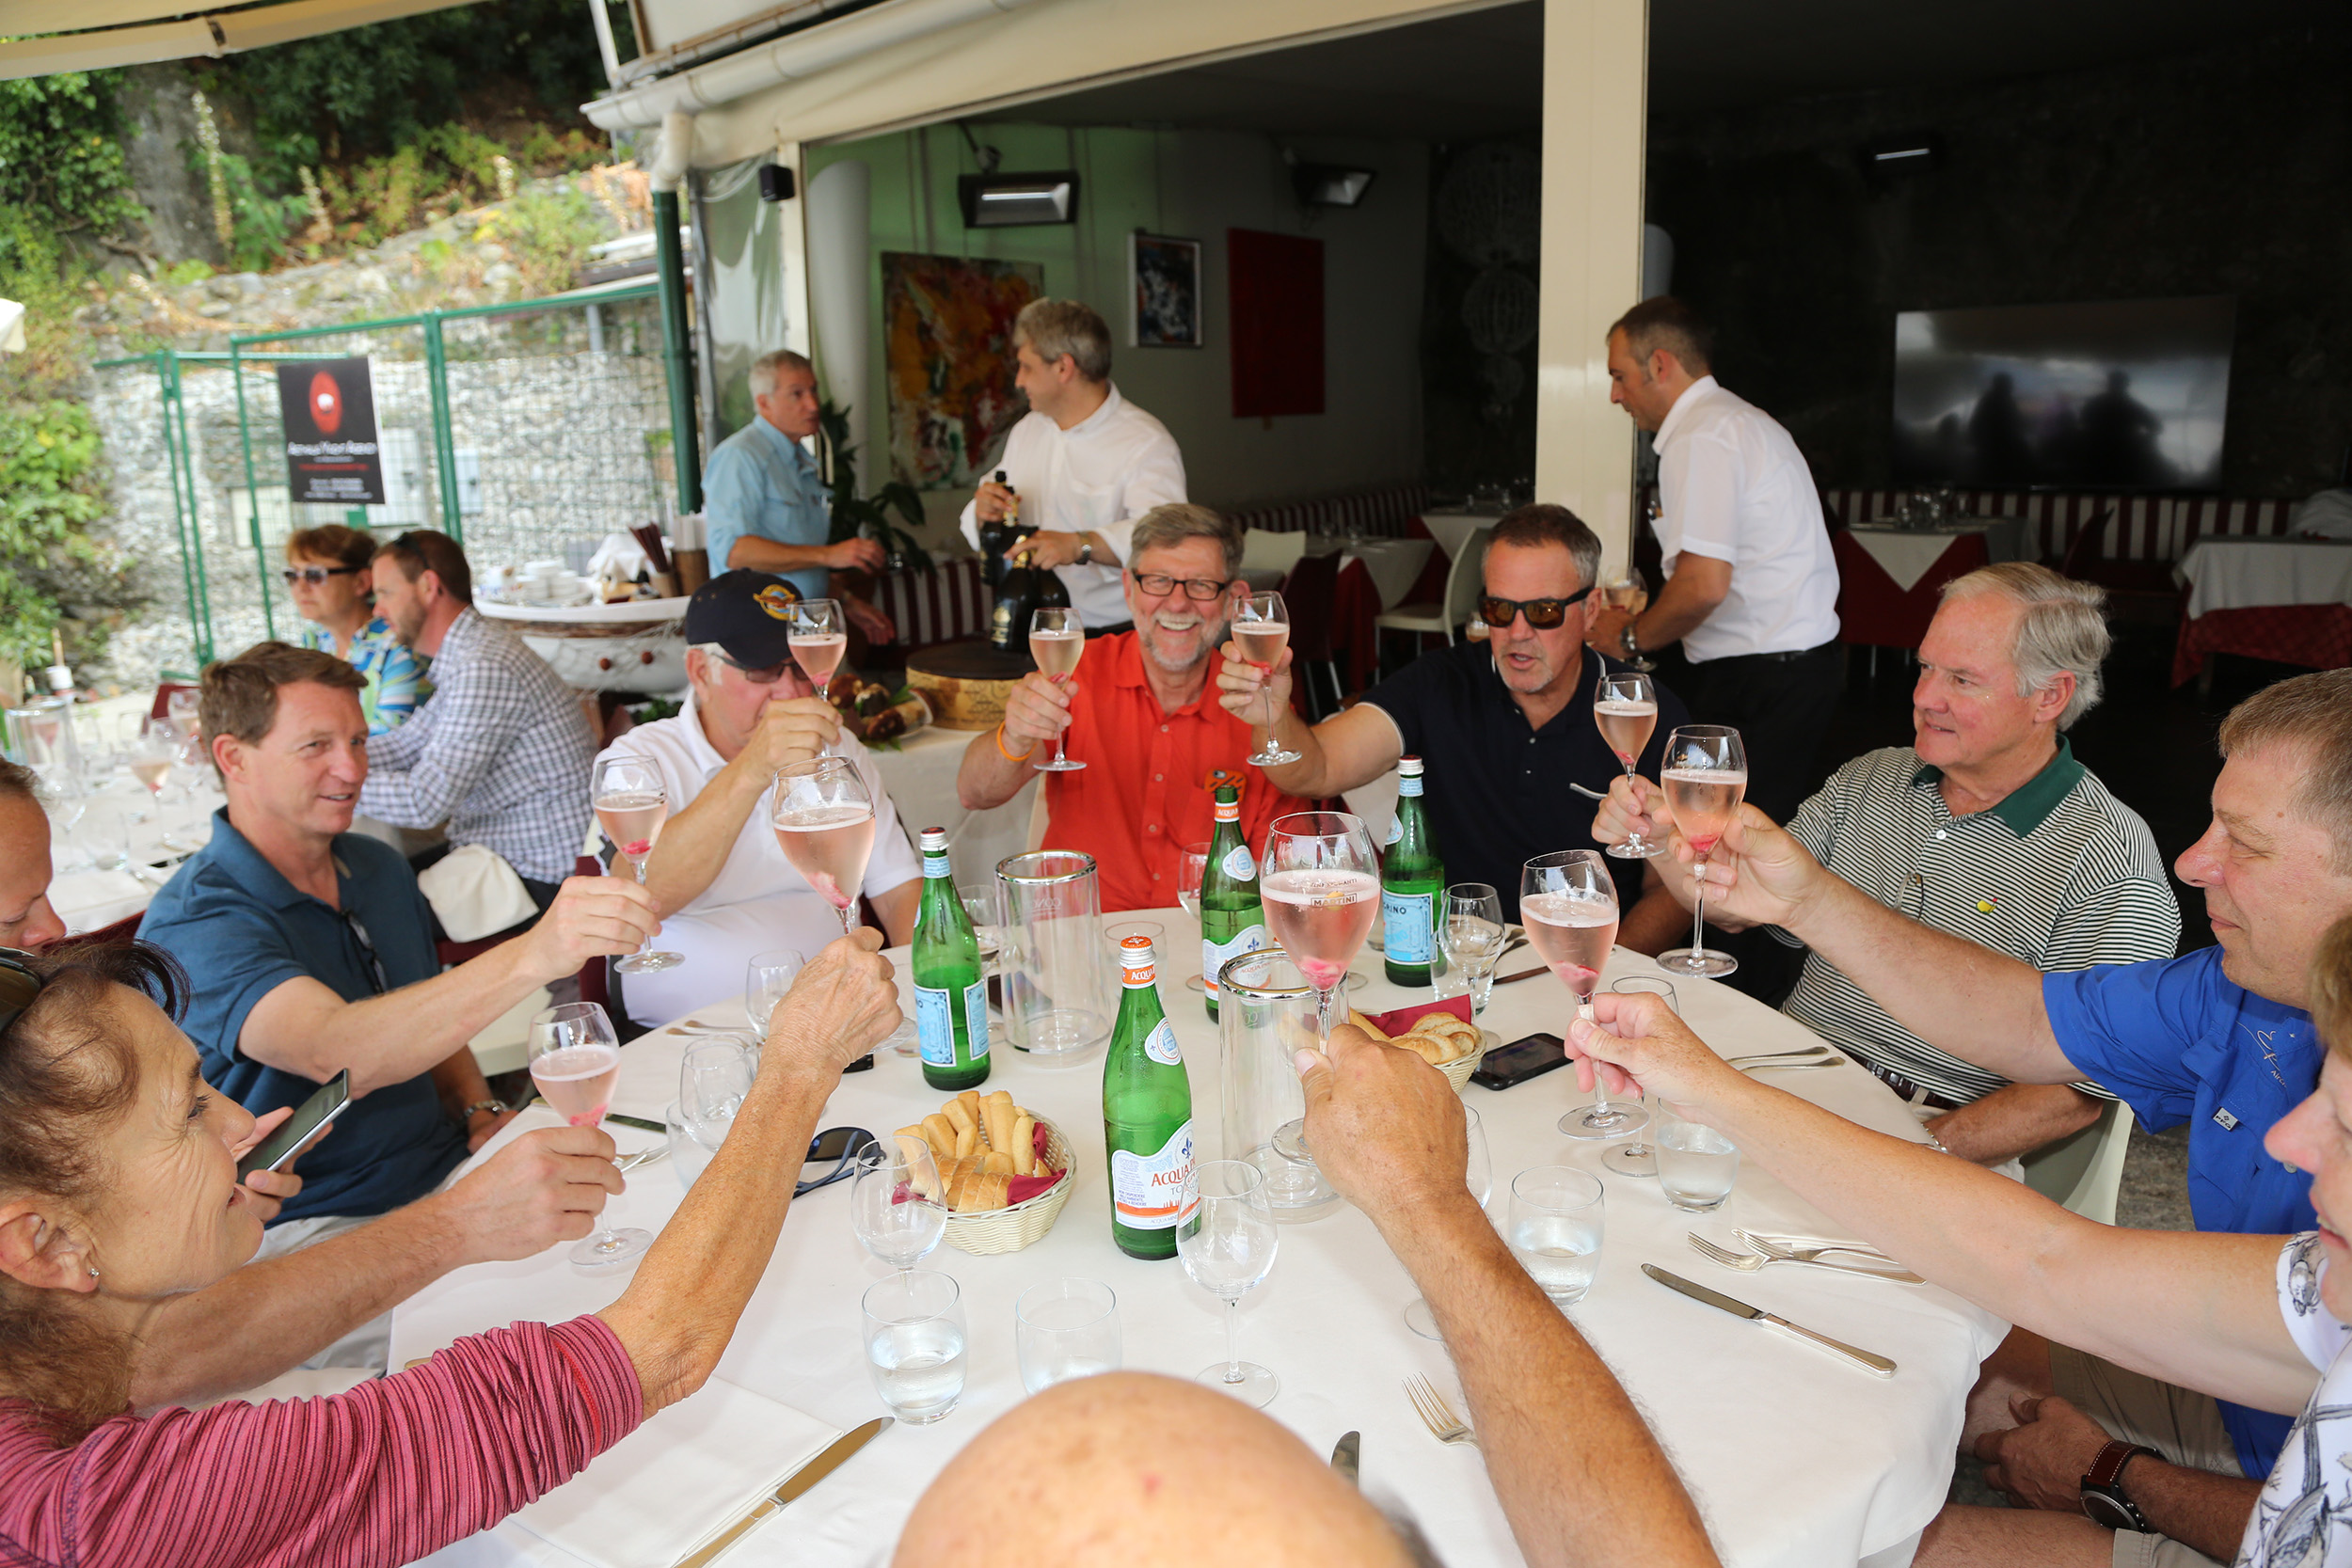 The Epic voyagers toast their arrival in Italy. Photo by Jean-Marie Urlacher, courtesy of Epic Aircraft.